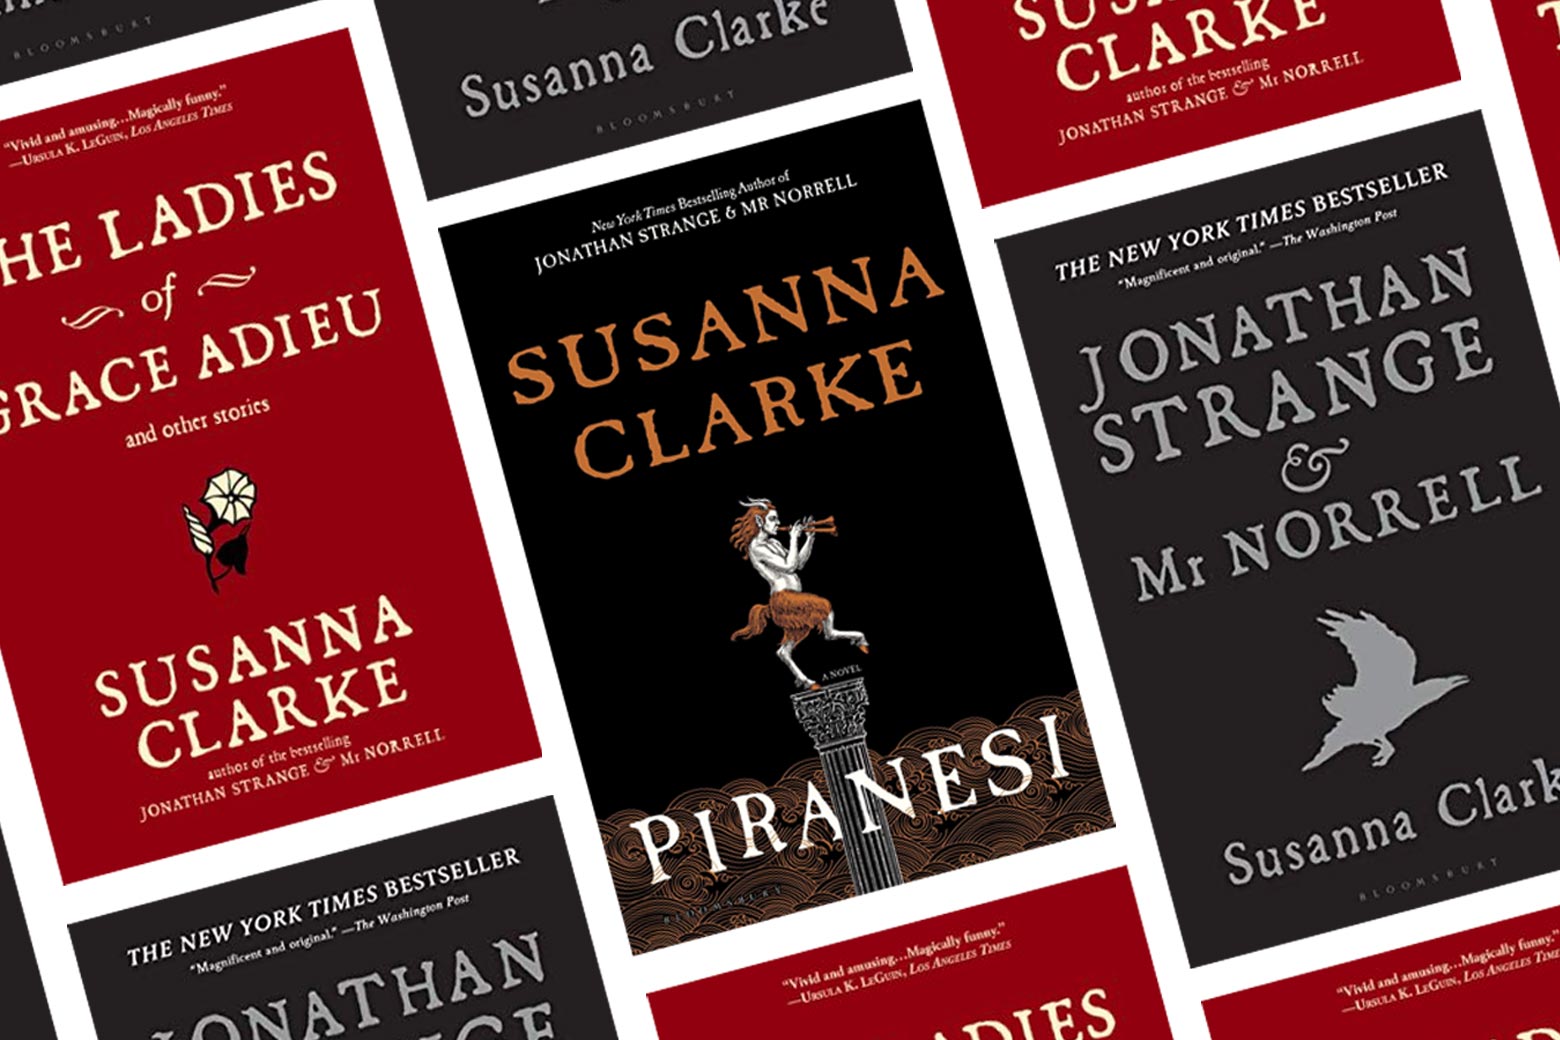 The cover of Piranesi alongside covers of other books by Susanna Clarke.